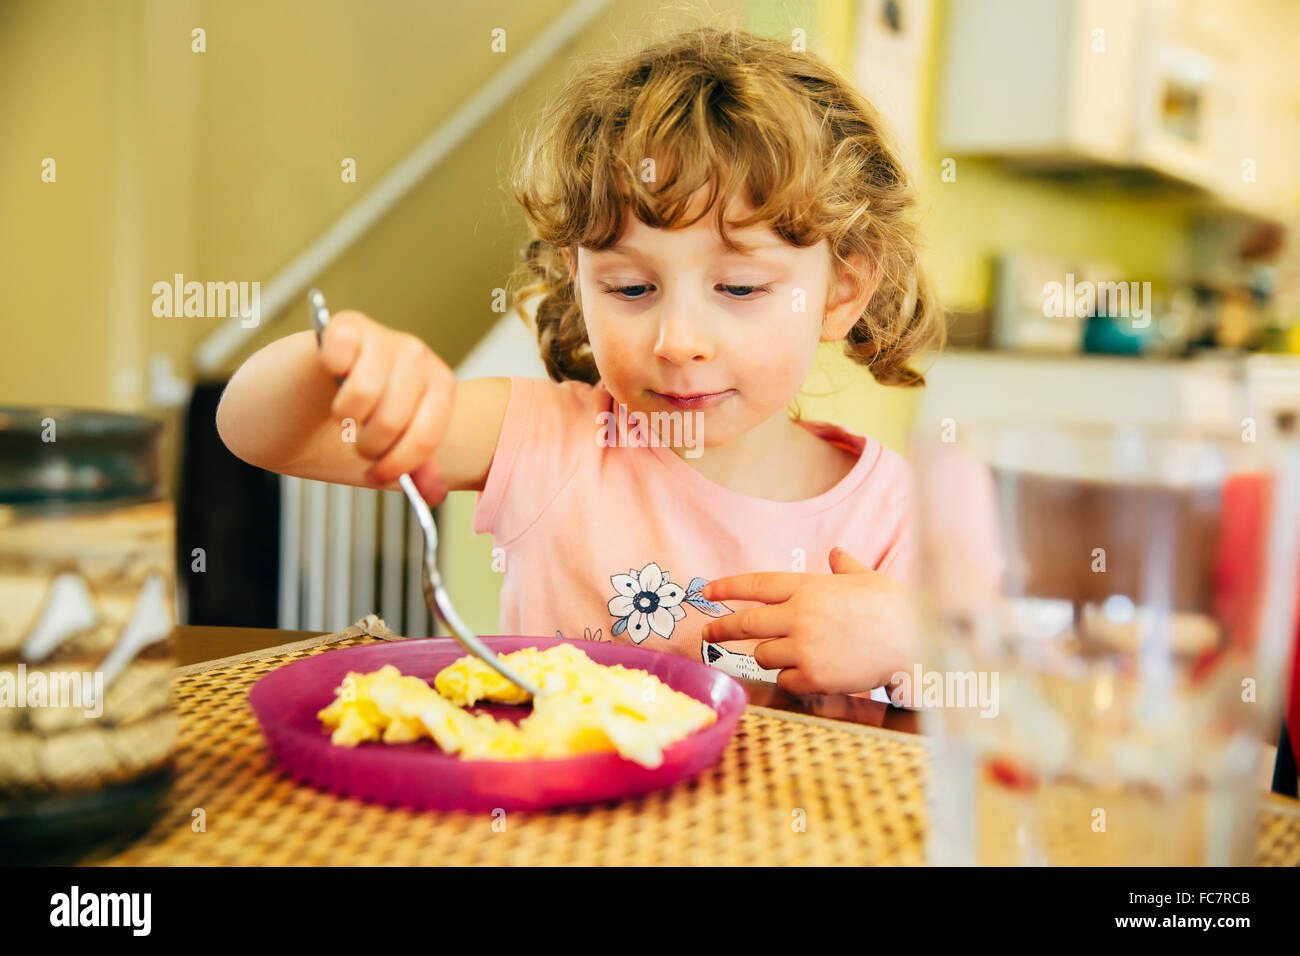 Caucasian girl eating at table Banque D'Images